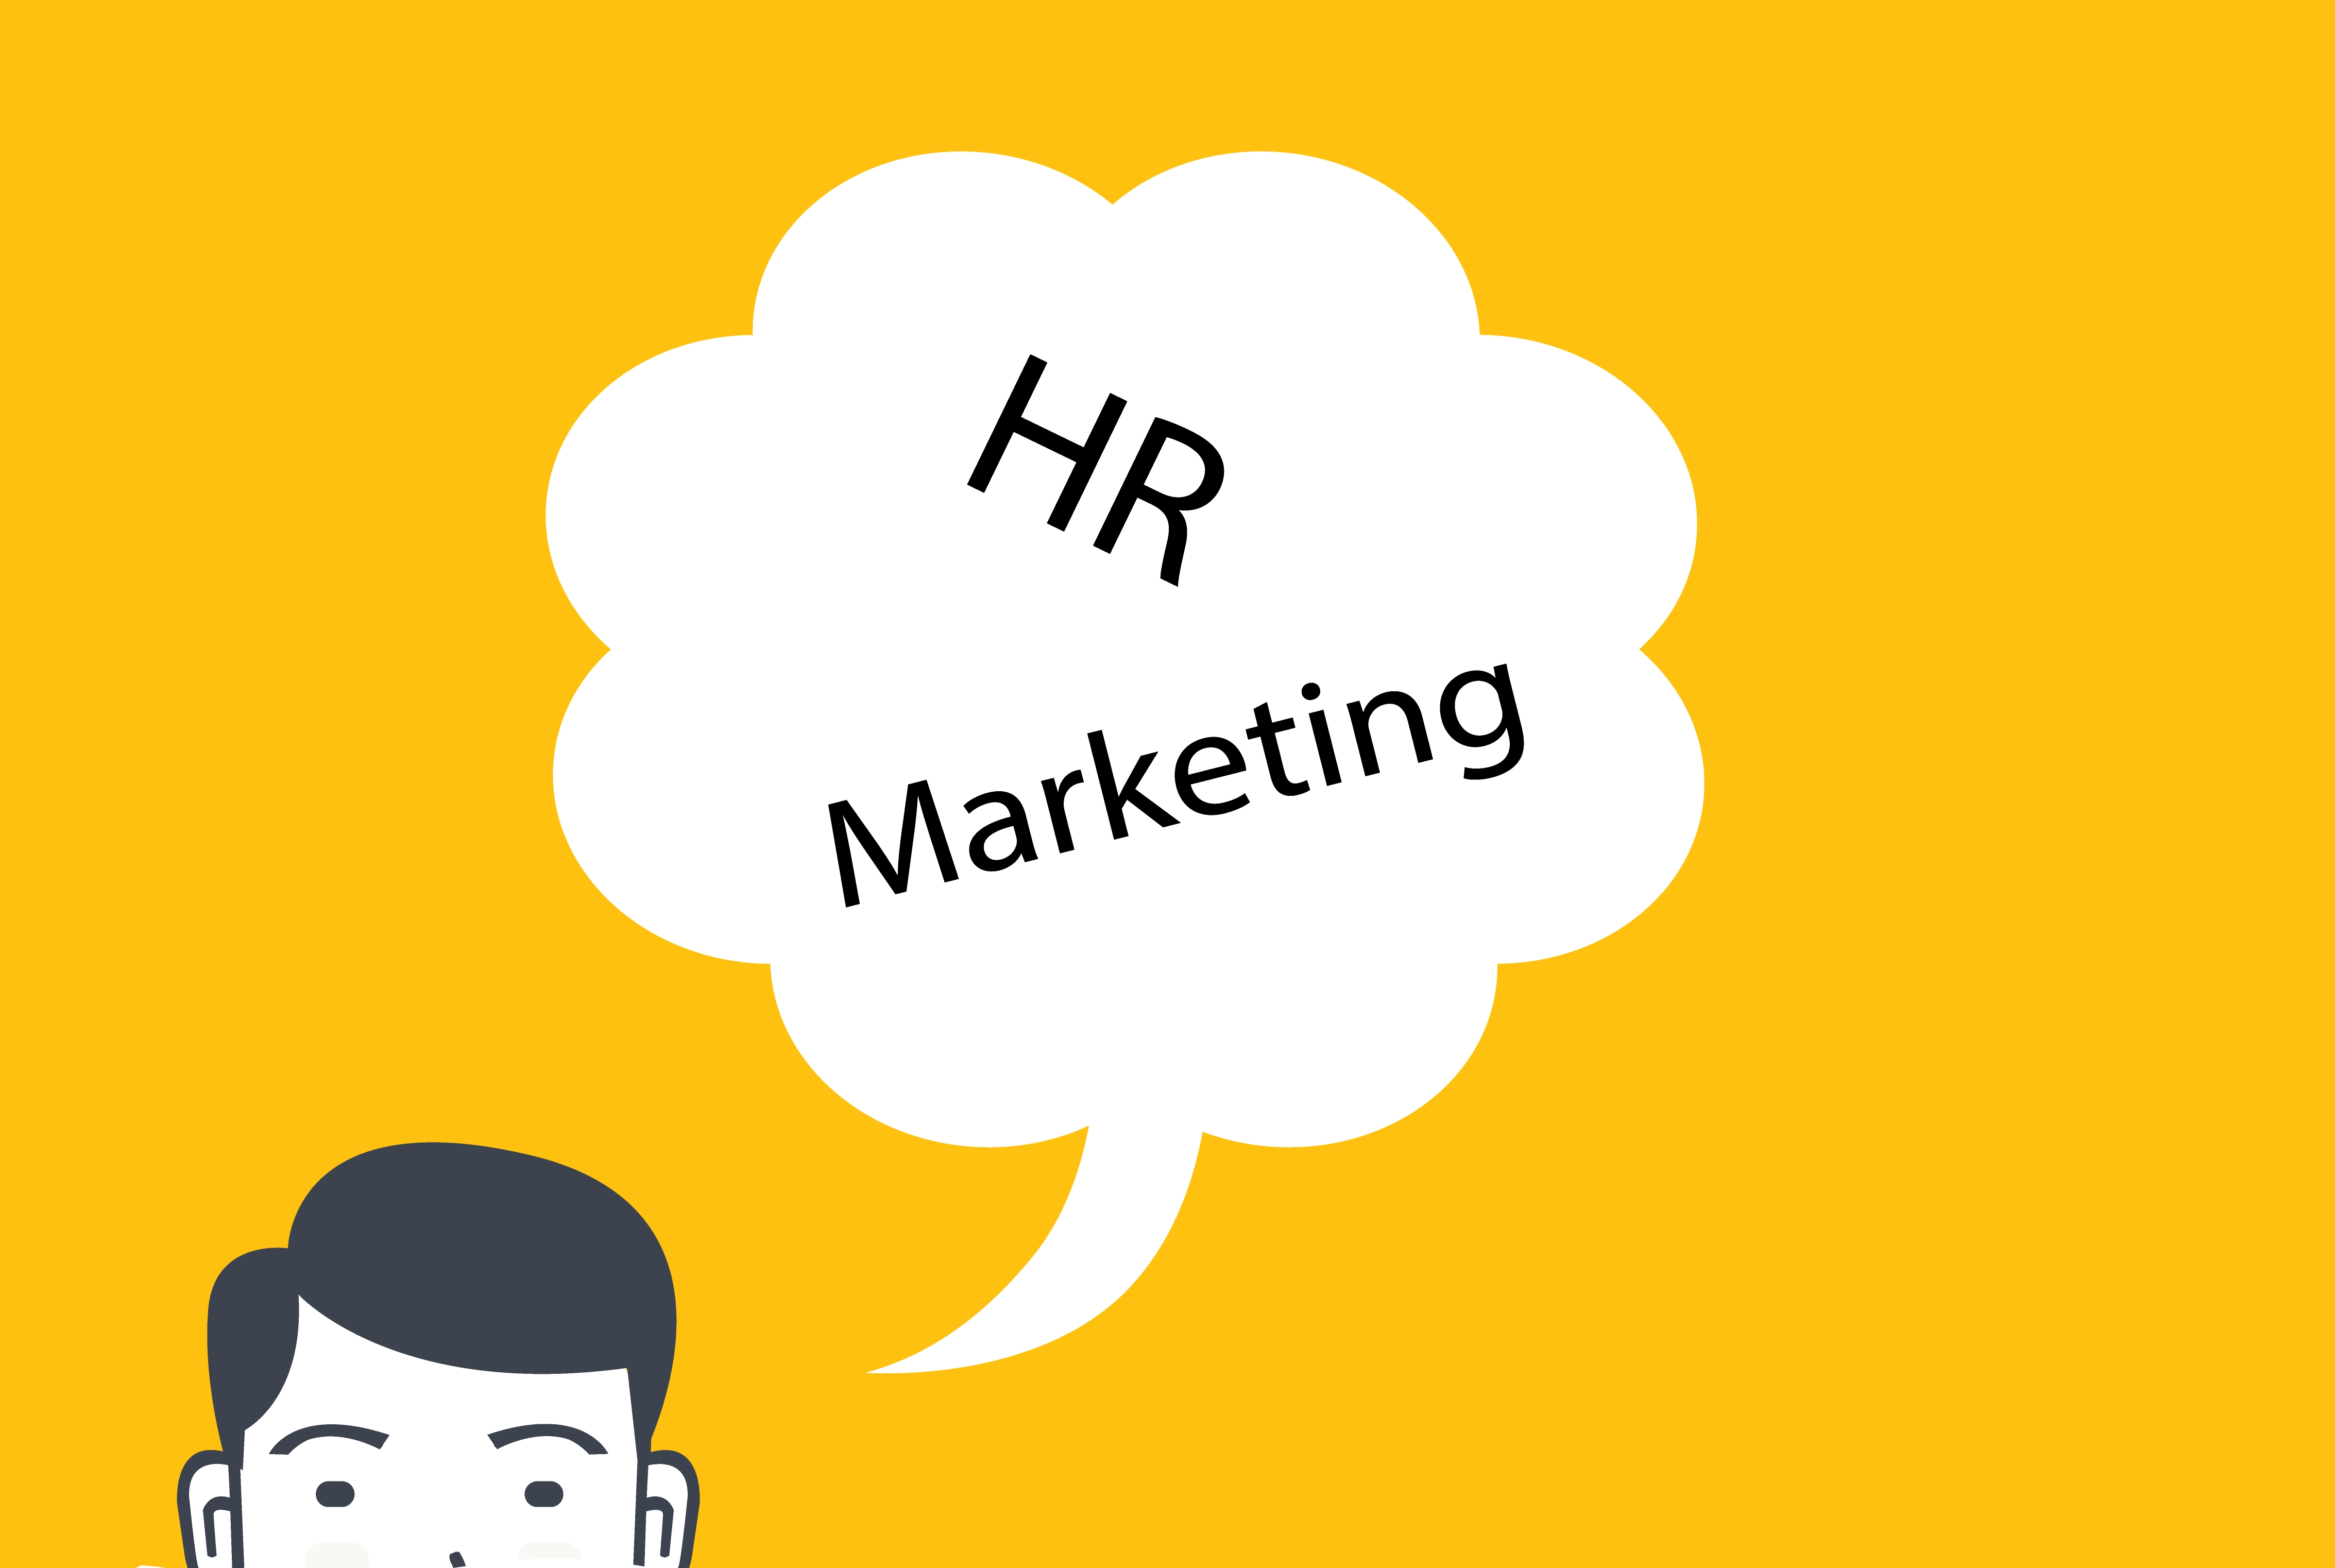 It's Time for HR to Start Thinking More Like Marketing